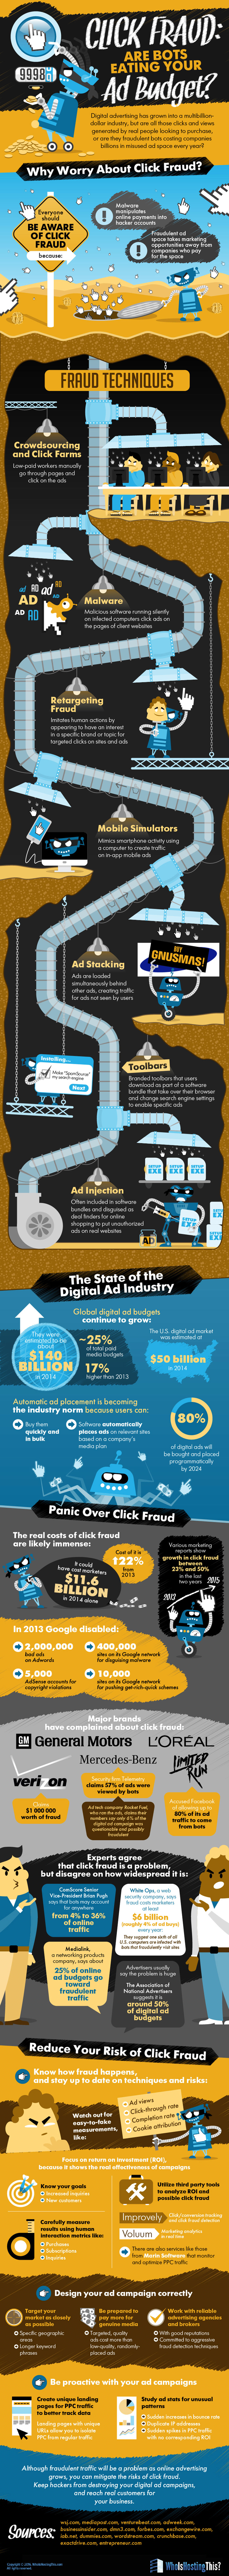 Internet-Click-Fraud-Are-Bots-Eating-Your-Advertising-Budget-Infographic